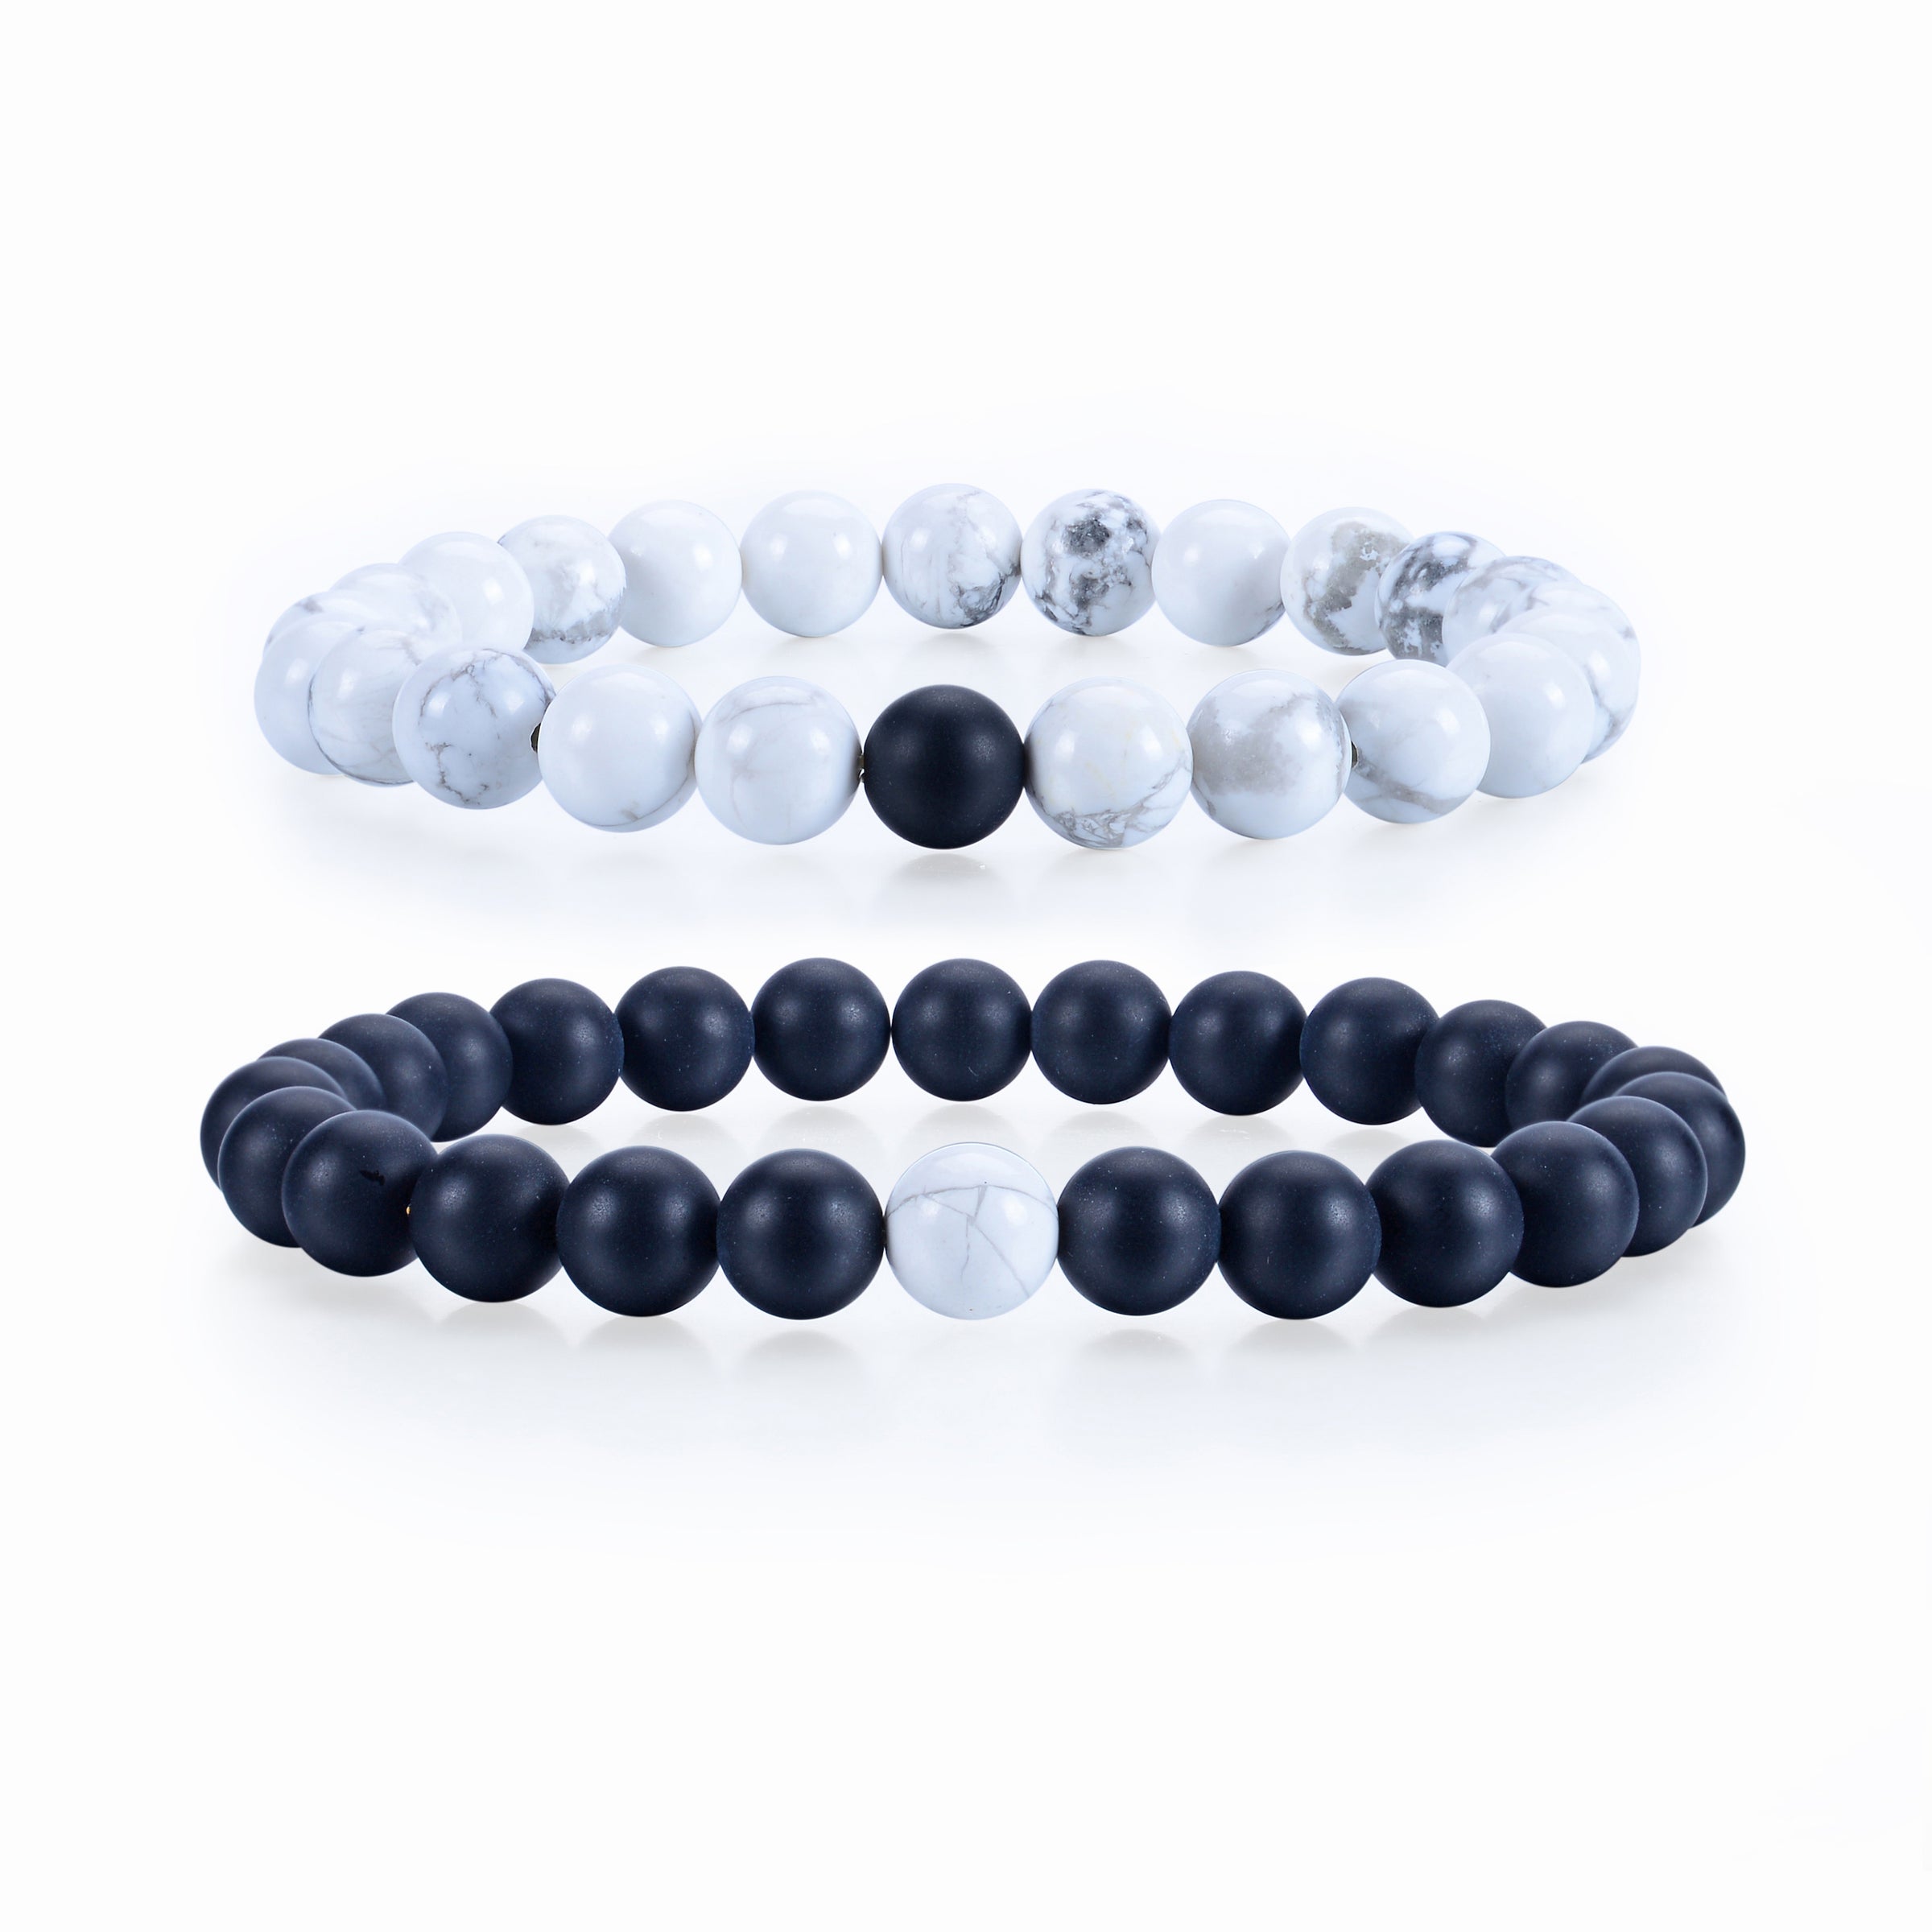 Couples Distance Stretch Bracelets | 8mm Beads (Matte Black Agate and White Howlite)